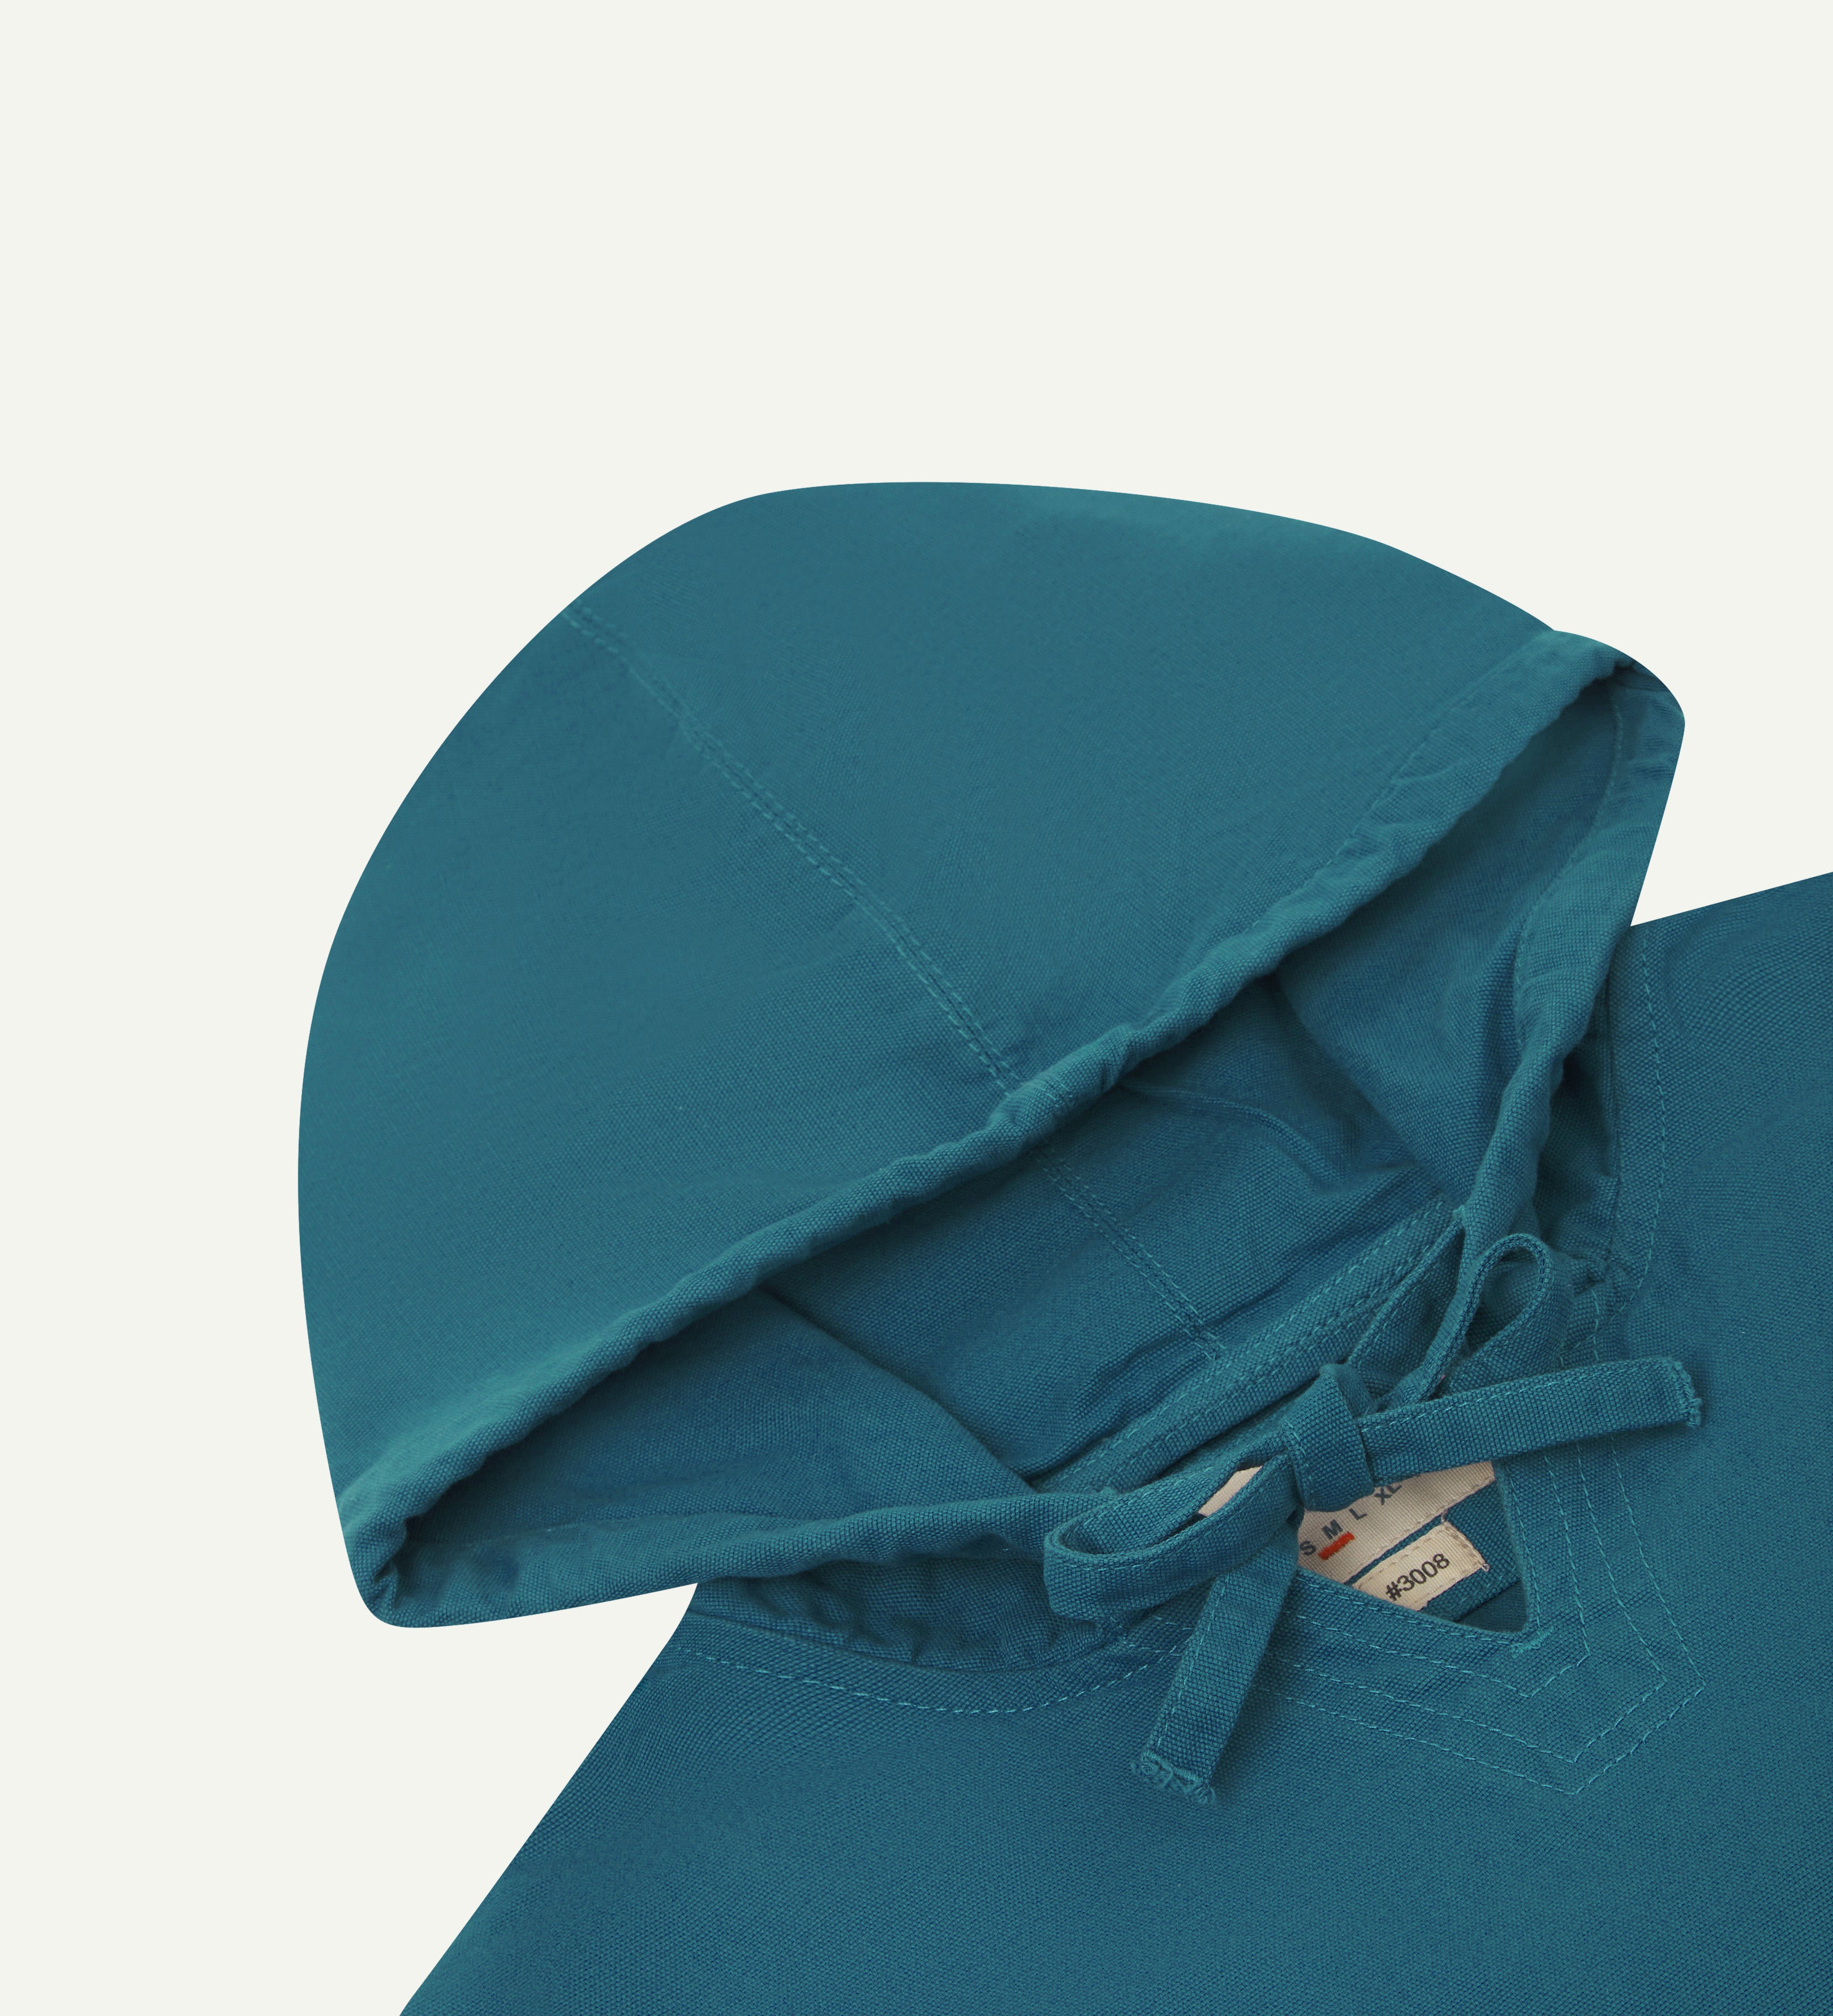 Close front flat shot of uskees mid-blue men's organic cotton smock showing hood.